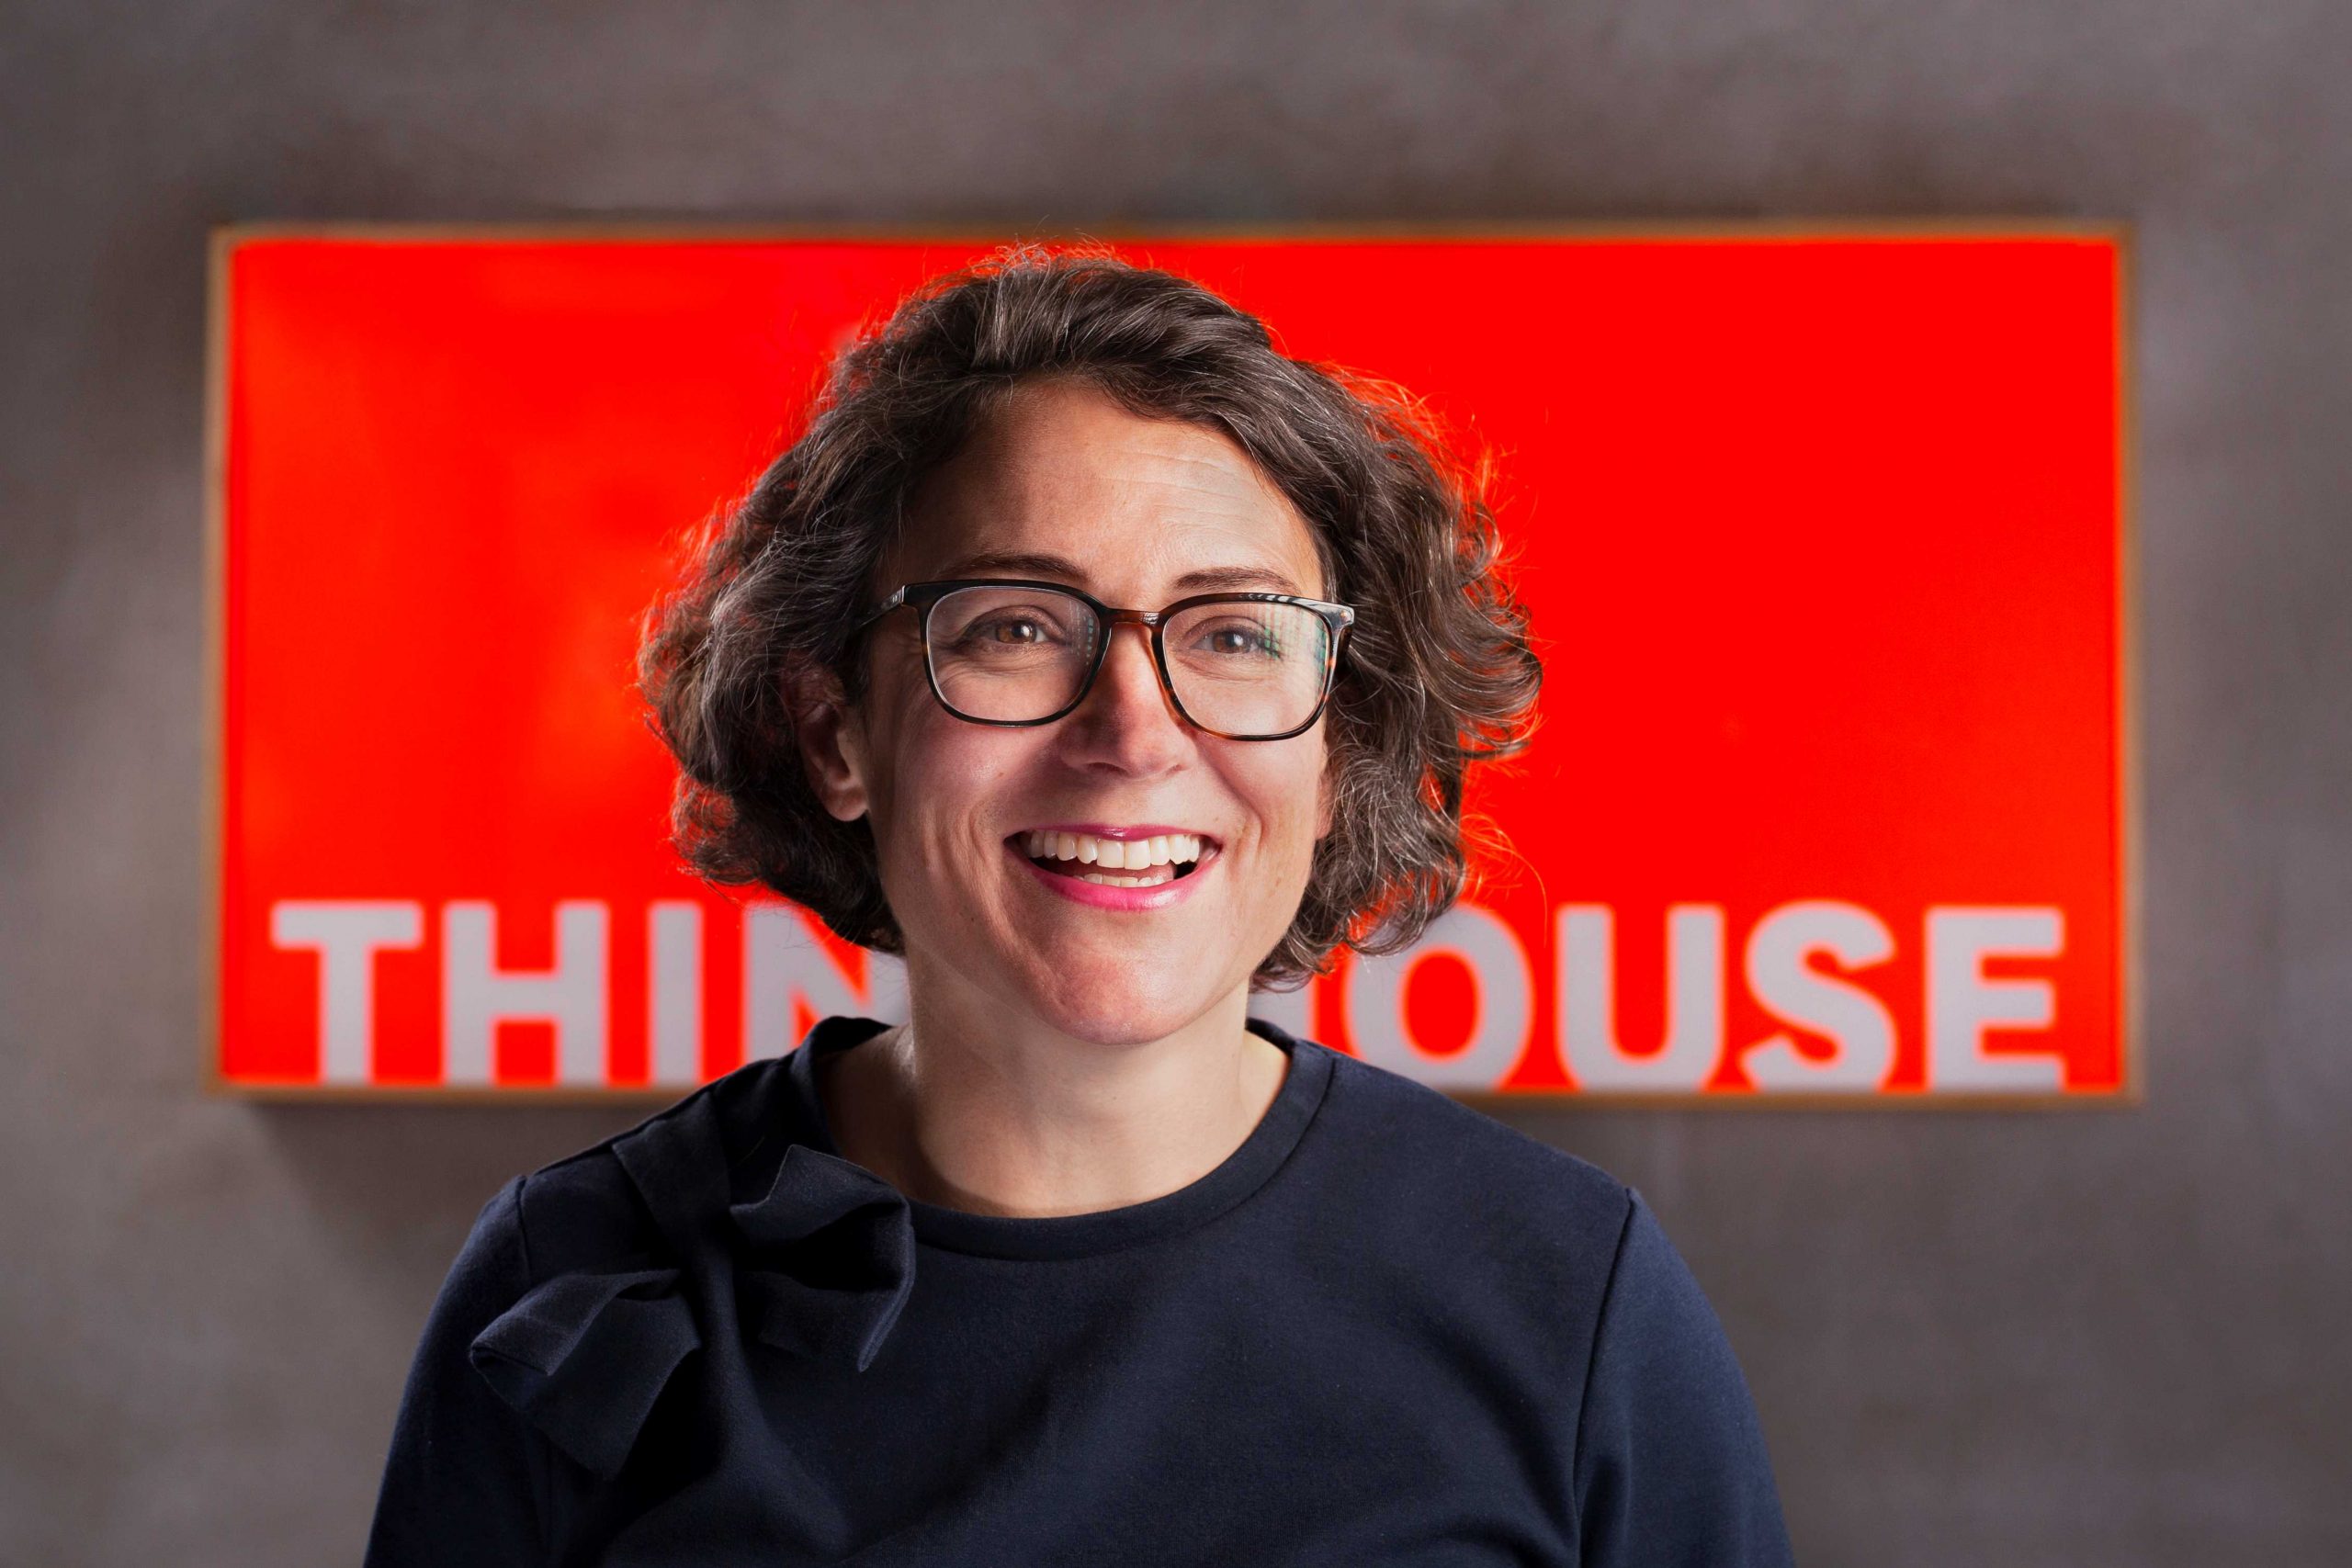 Claire Hyland, head of The Youth Lab, Thinkhouse